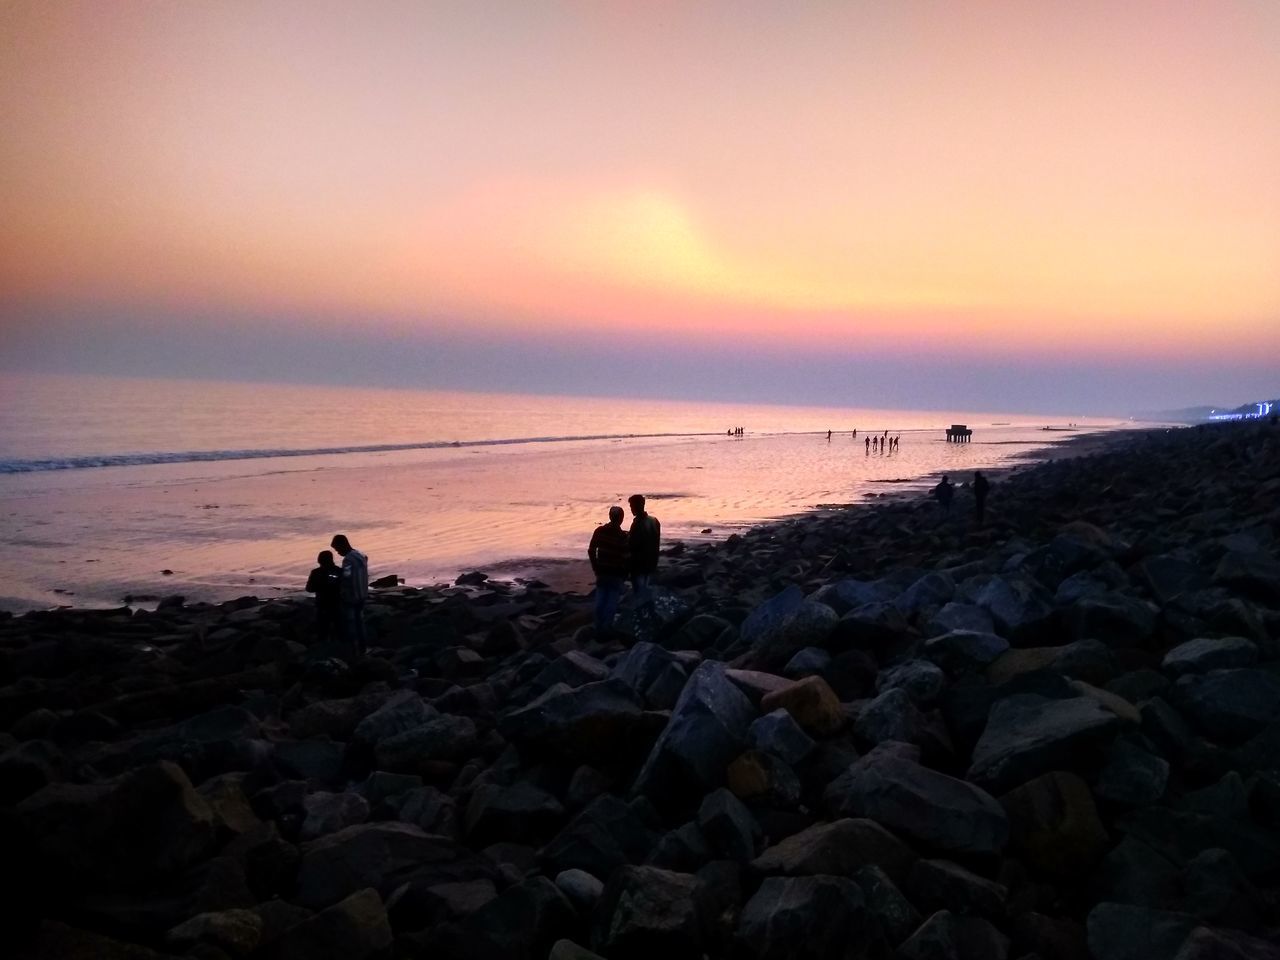 SCENIC VIEW OF ROCKS AT BEACH DURING SUNSET